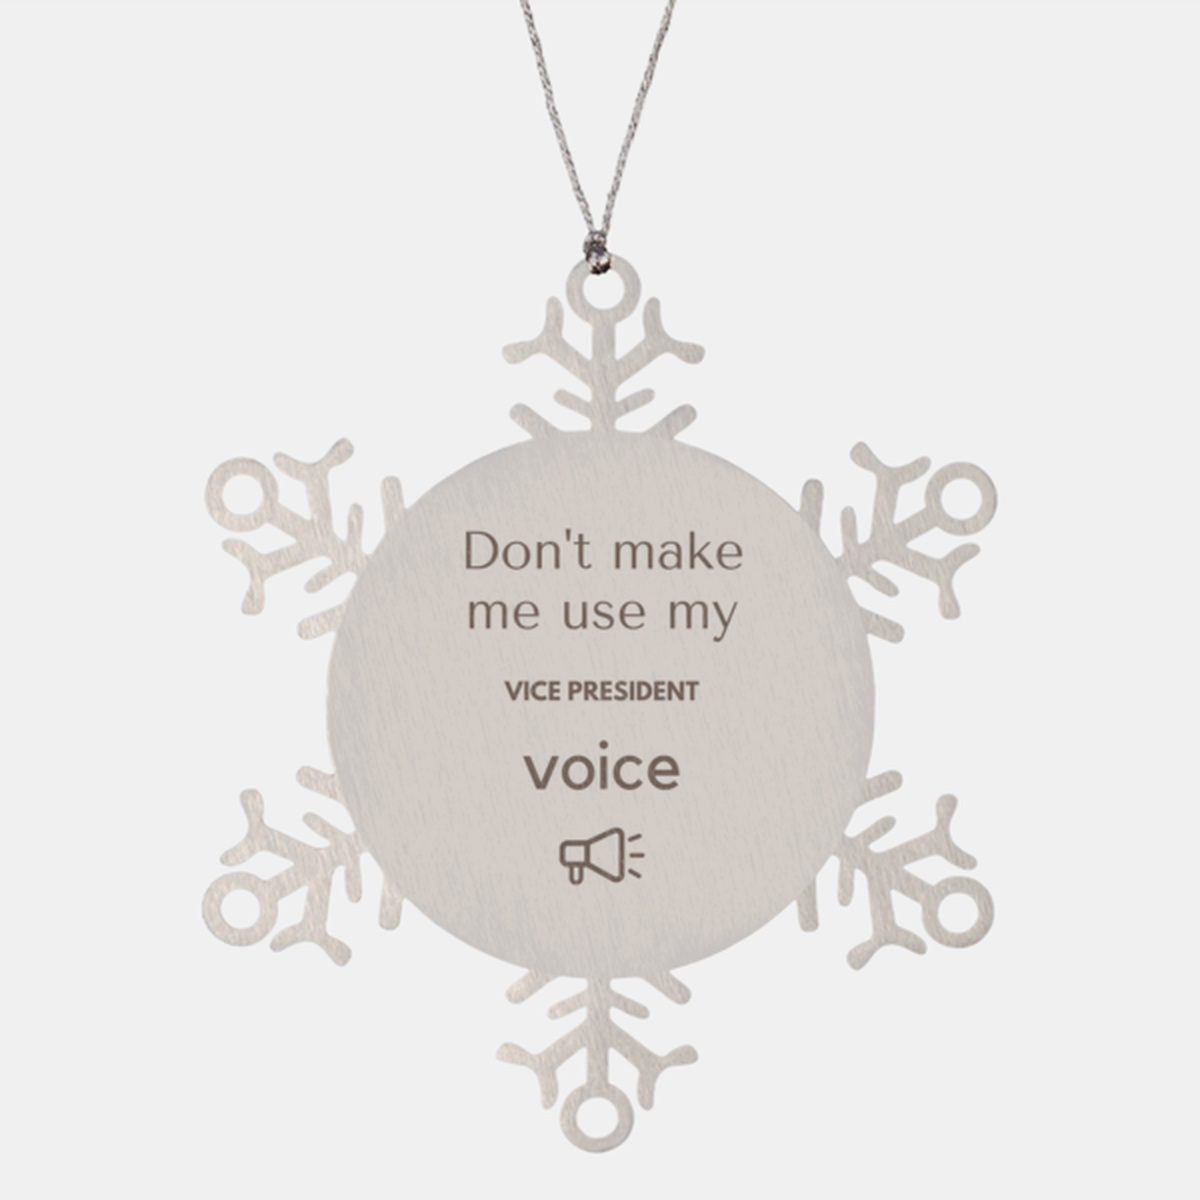 Don't make me use my Vice President voice, Sarcasm Vice President Ornament Gifts, Christmas Vice President Snowflake Ornament Unique Gifts For Vice President Coworkers, Men, Women, Colleague, Friends